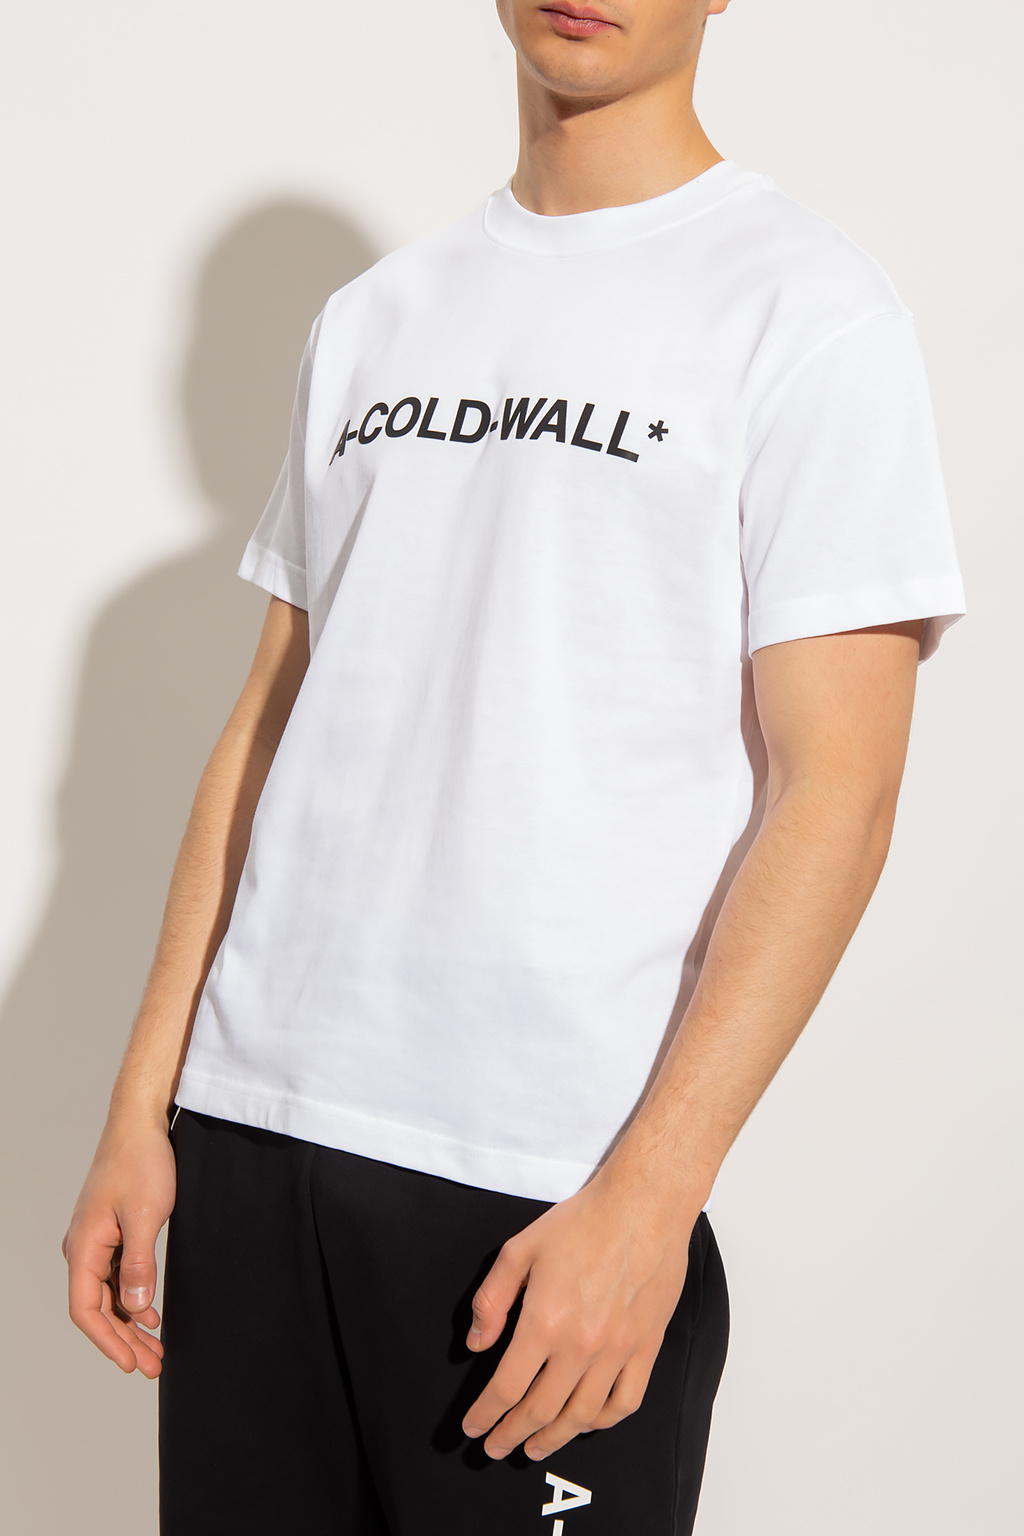 A-COLD-WALL* Love Is print T-shirt